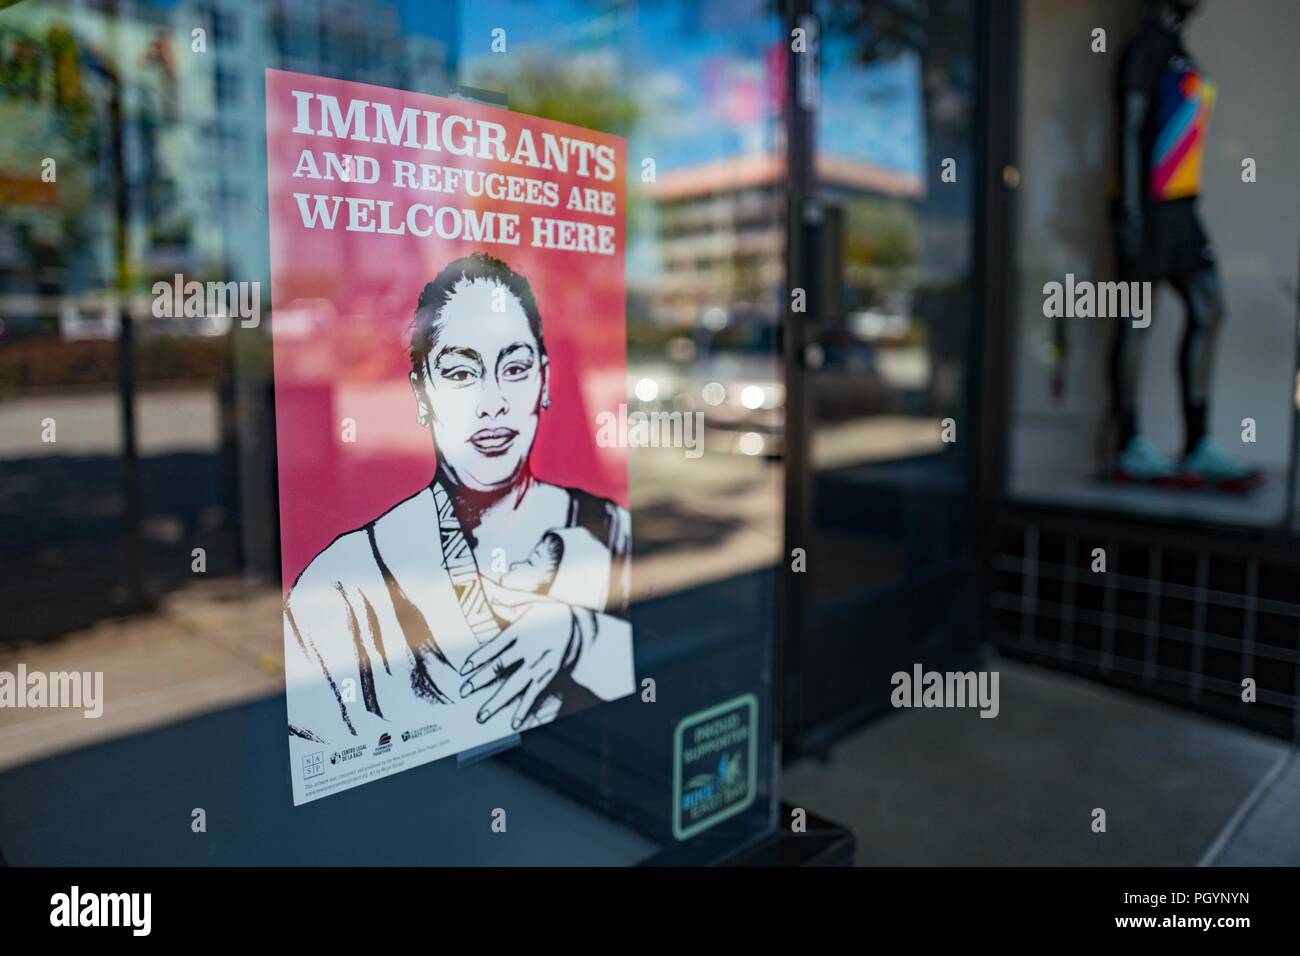 Poster in shop window of a store in downtown Berkeley, California with an image of a woman holding a baby, with text reading Immigrants and Refugees Welcome Here, indicating support of refugee populations who have relocated to the area, May 17, 2018. () Stock Photo